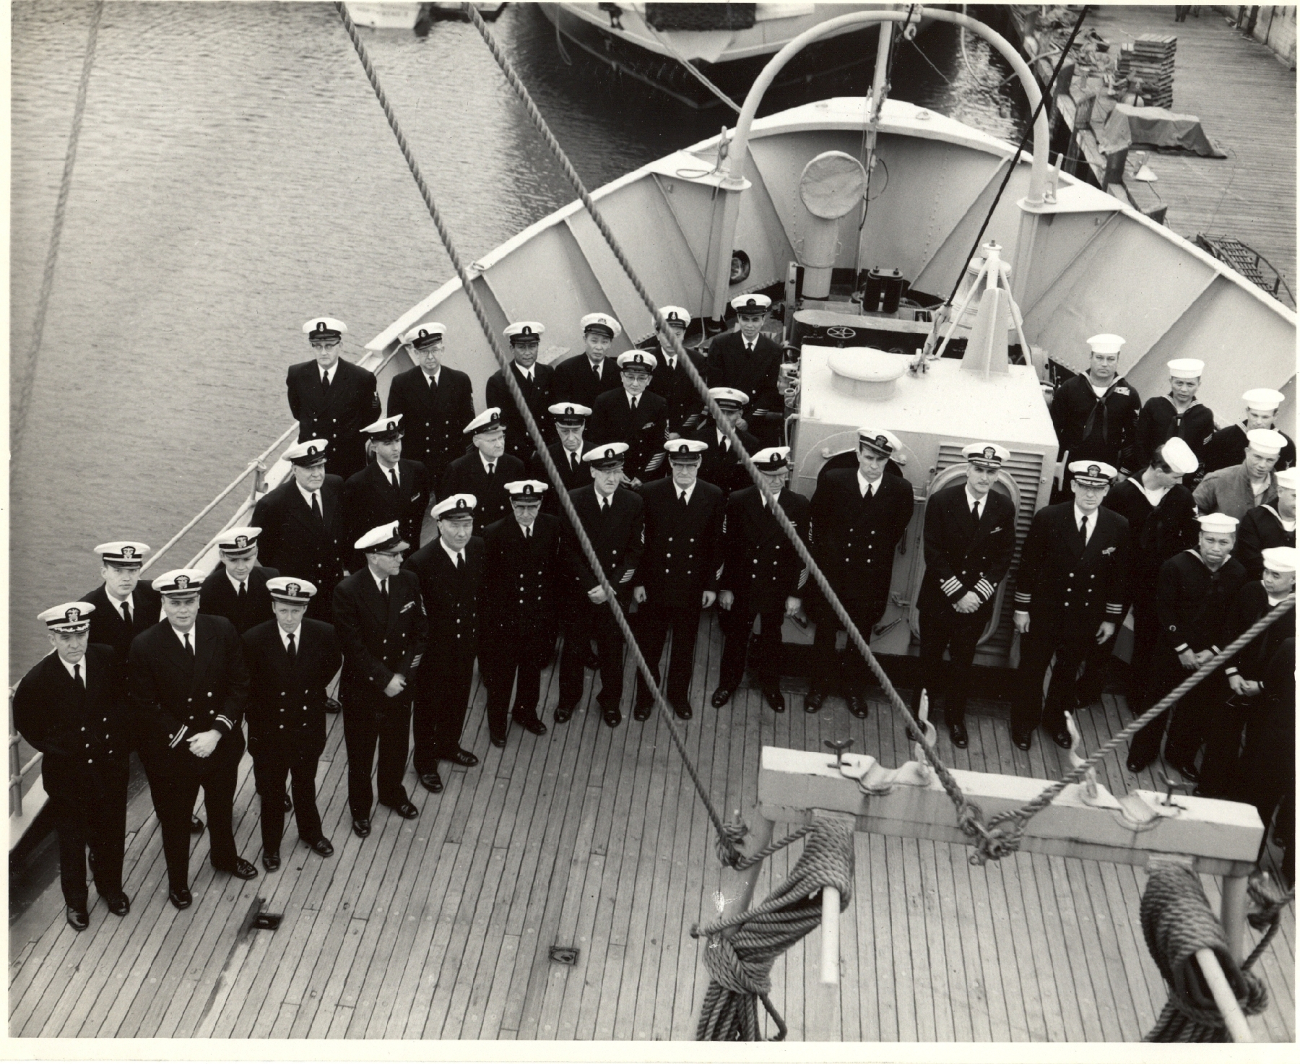 Officers and crew of PATHFINDER in Seattle